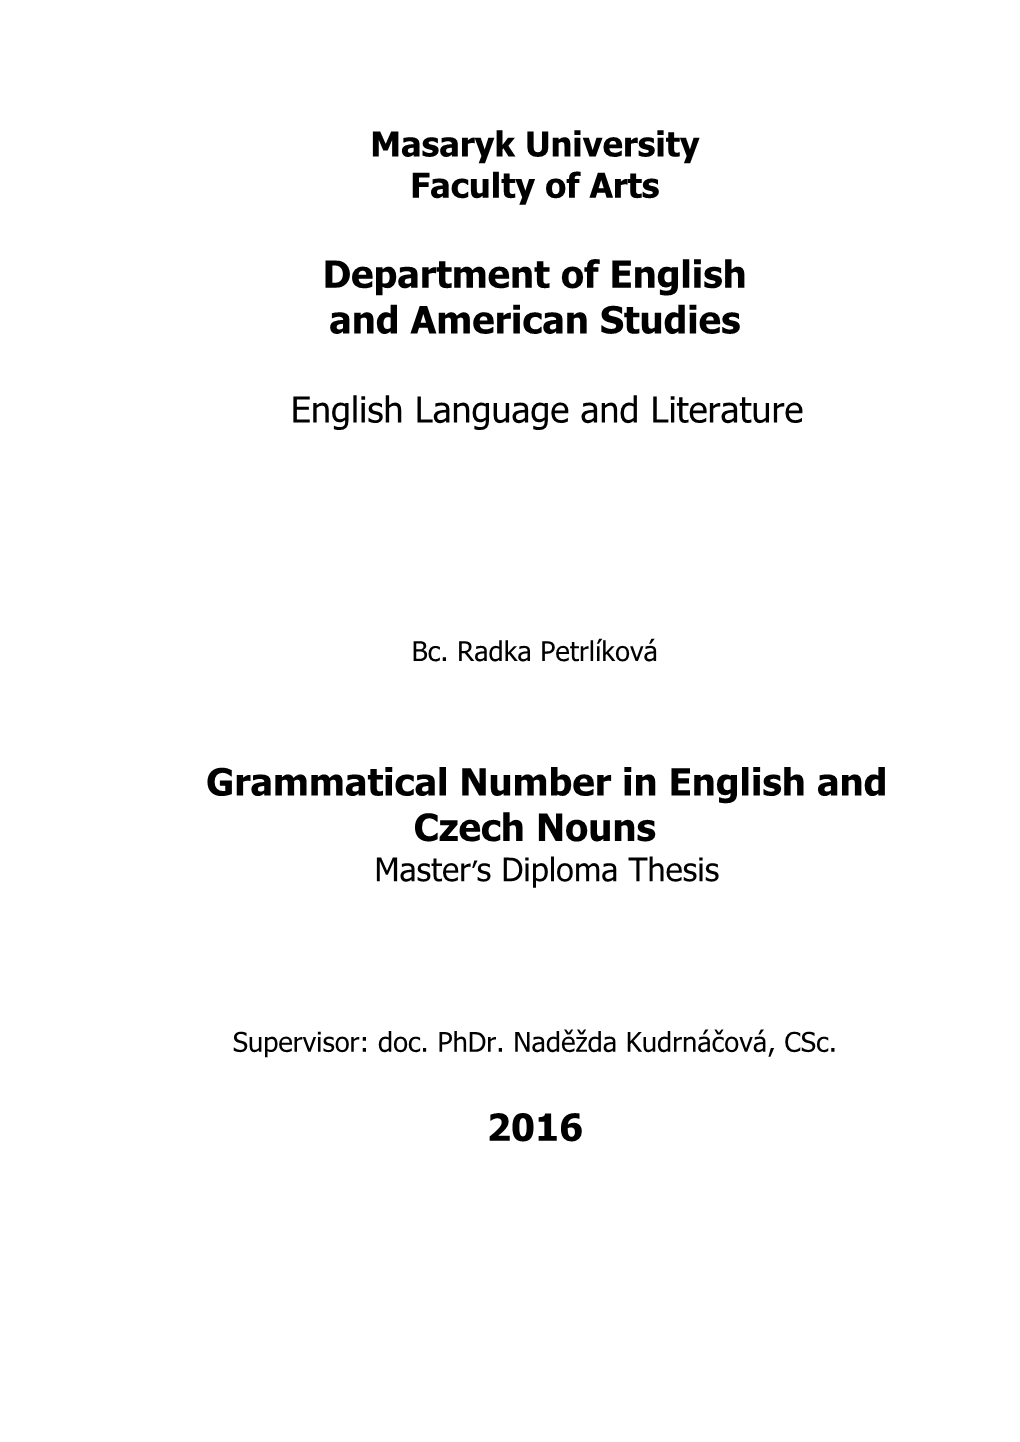 Grammatical Number in English and Czech Nouns Master’S Diploma Thesis